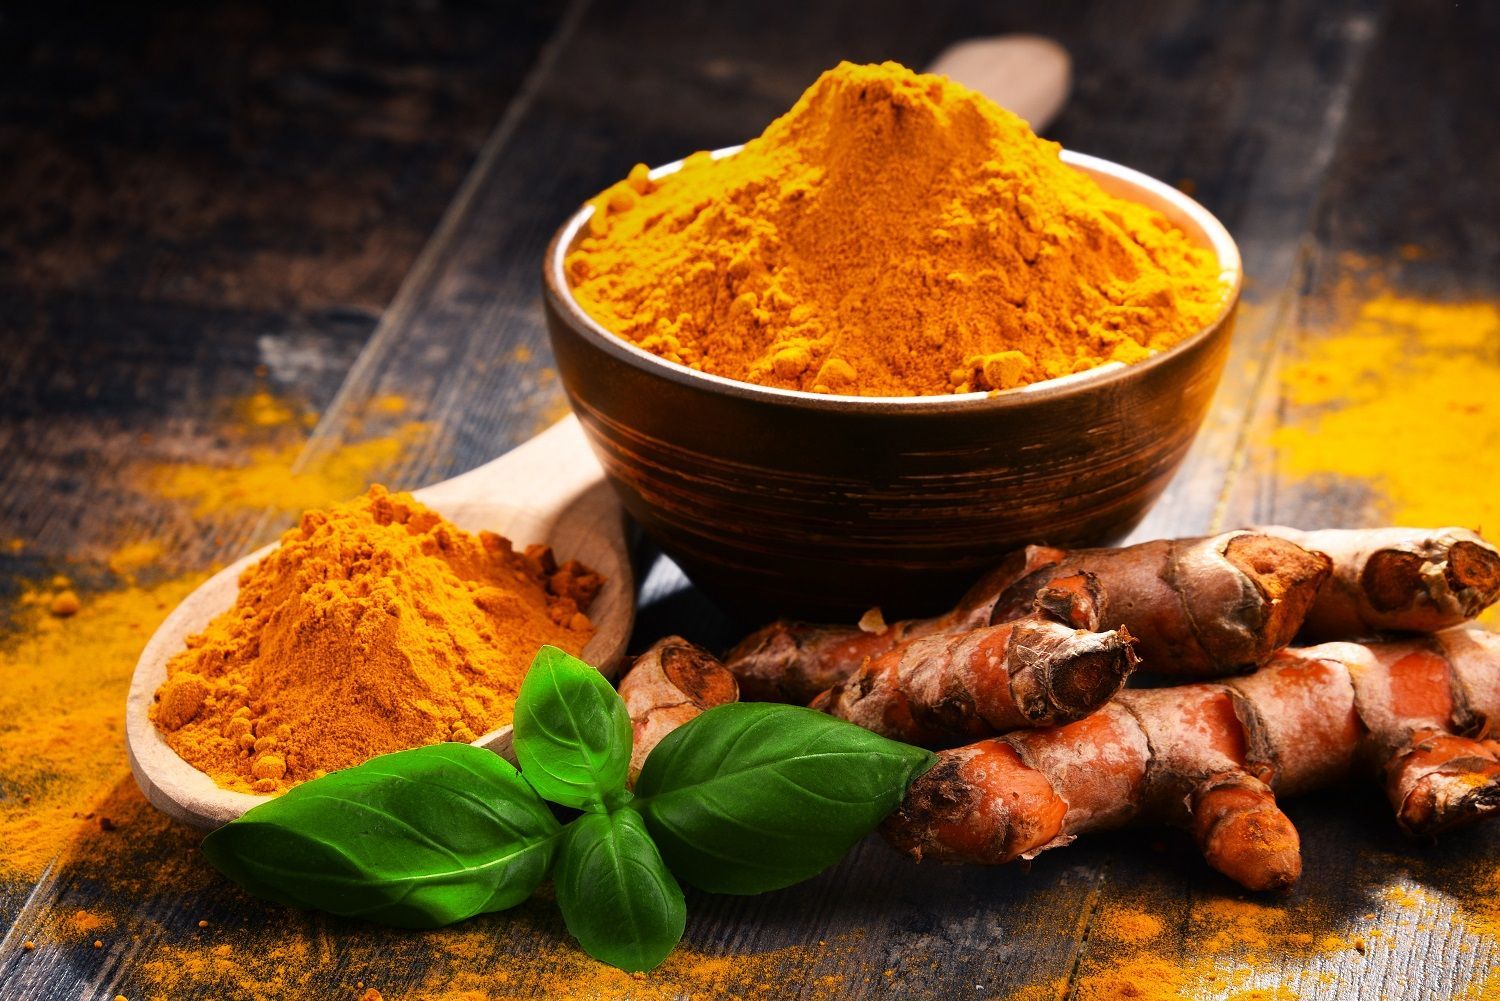 A bowl of turmeric powder along with pieces of turmeric root.